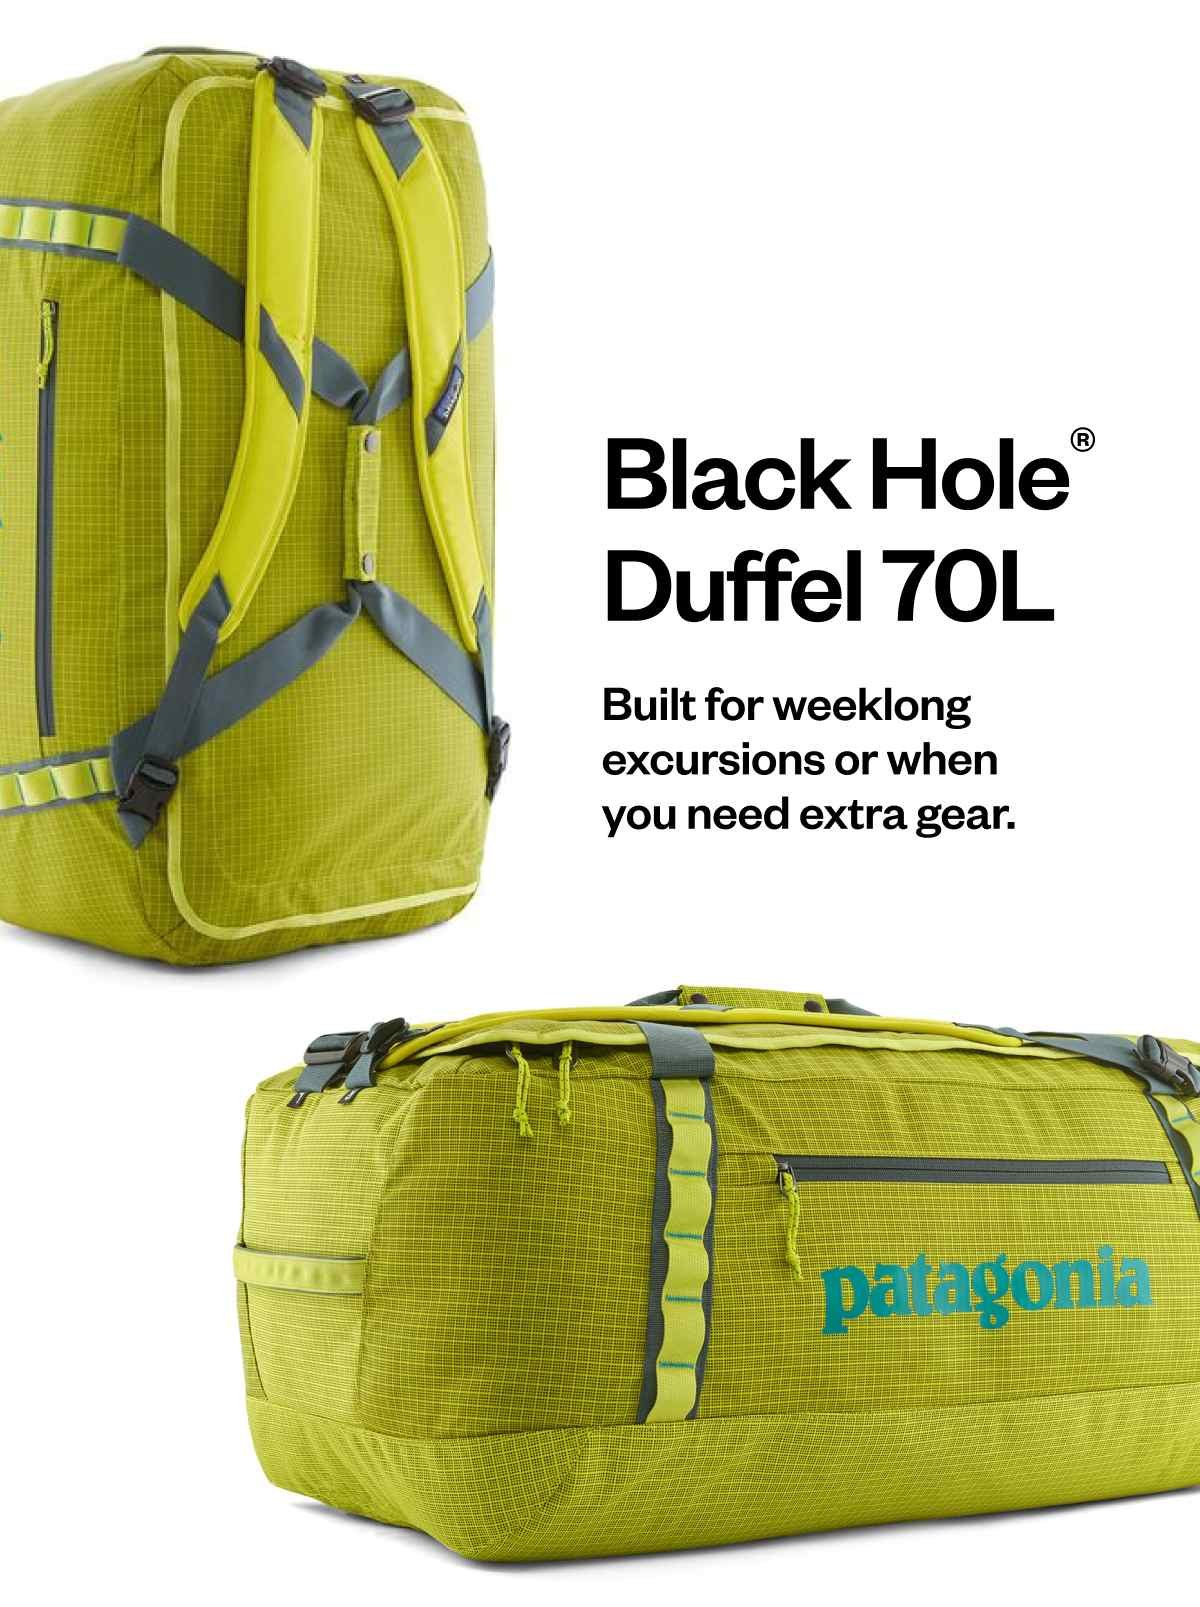 Black Hole® Duffel 70 liter. Built for weeklong excursions or when you need extra gear.